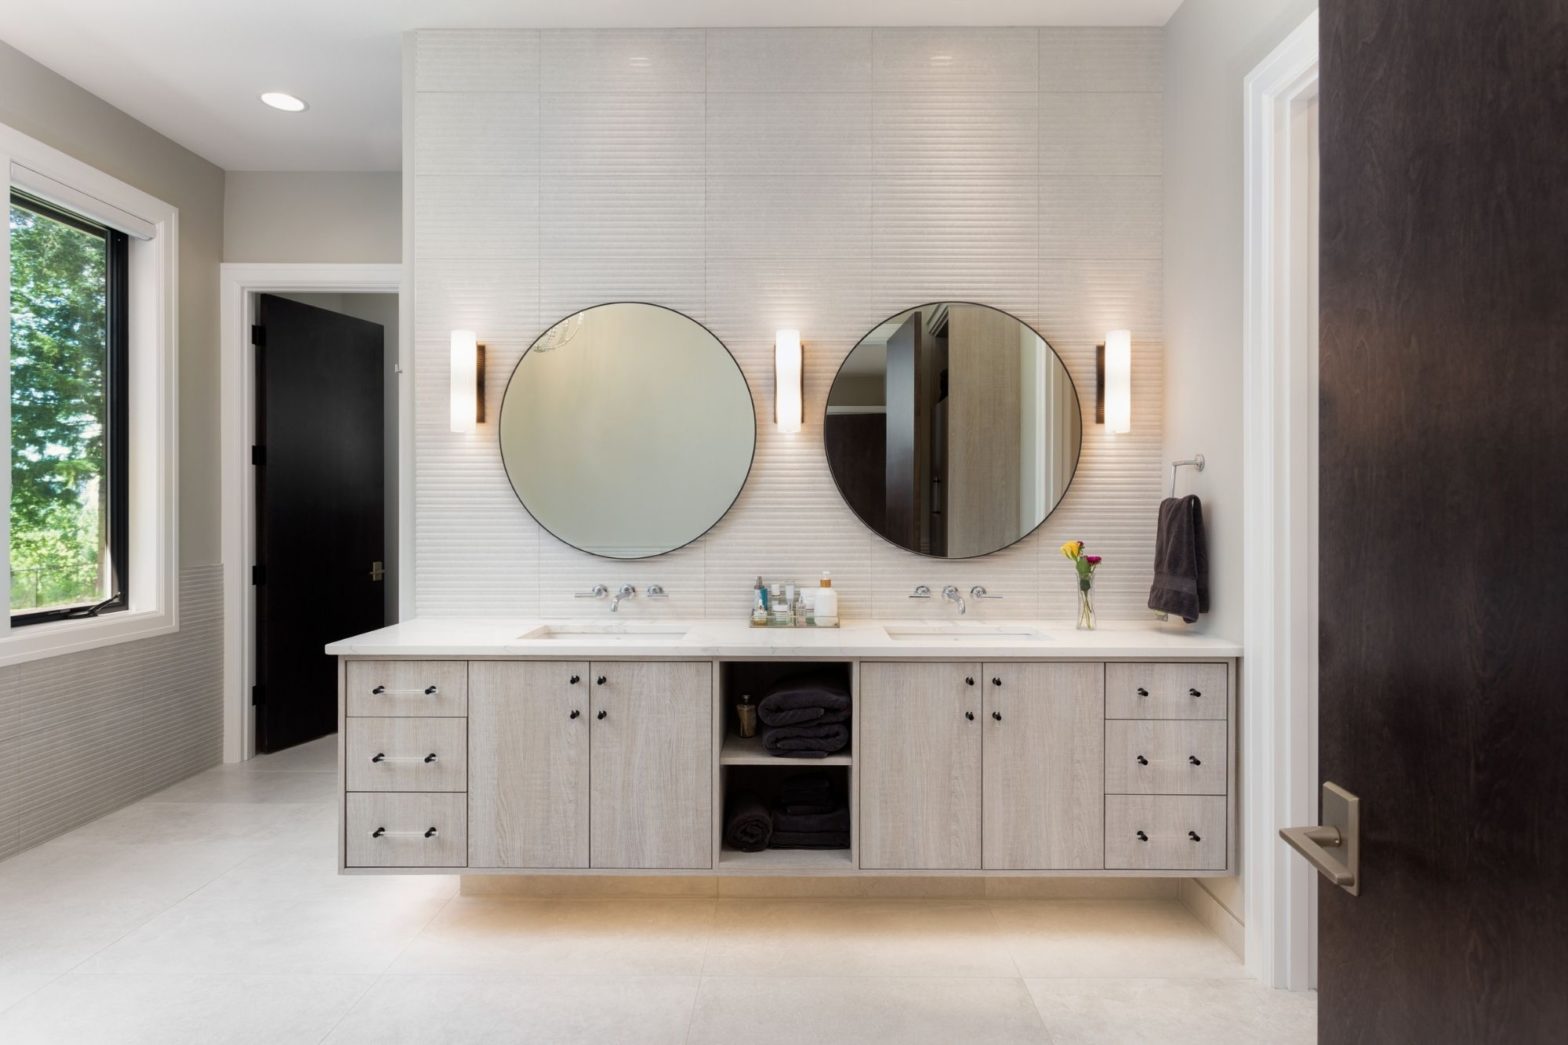 Guest or Master Bathroom Remodels Can Be Done Right on a Budget if You Find the Right Contractor.